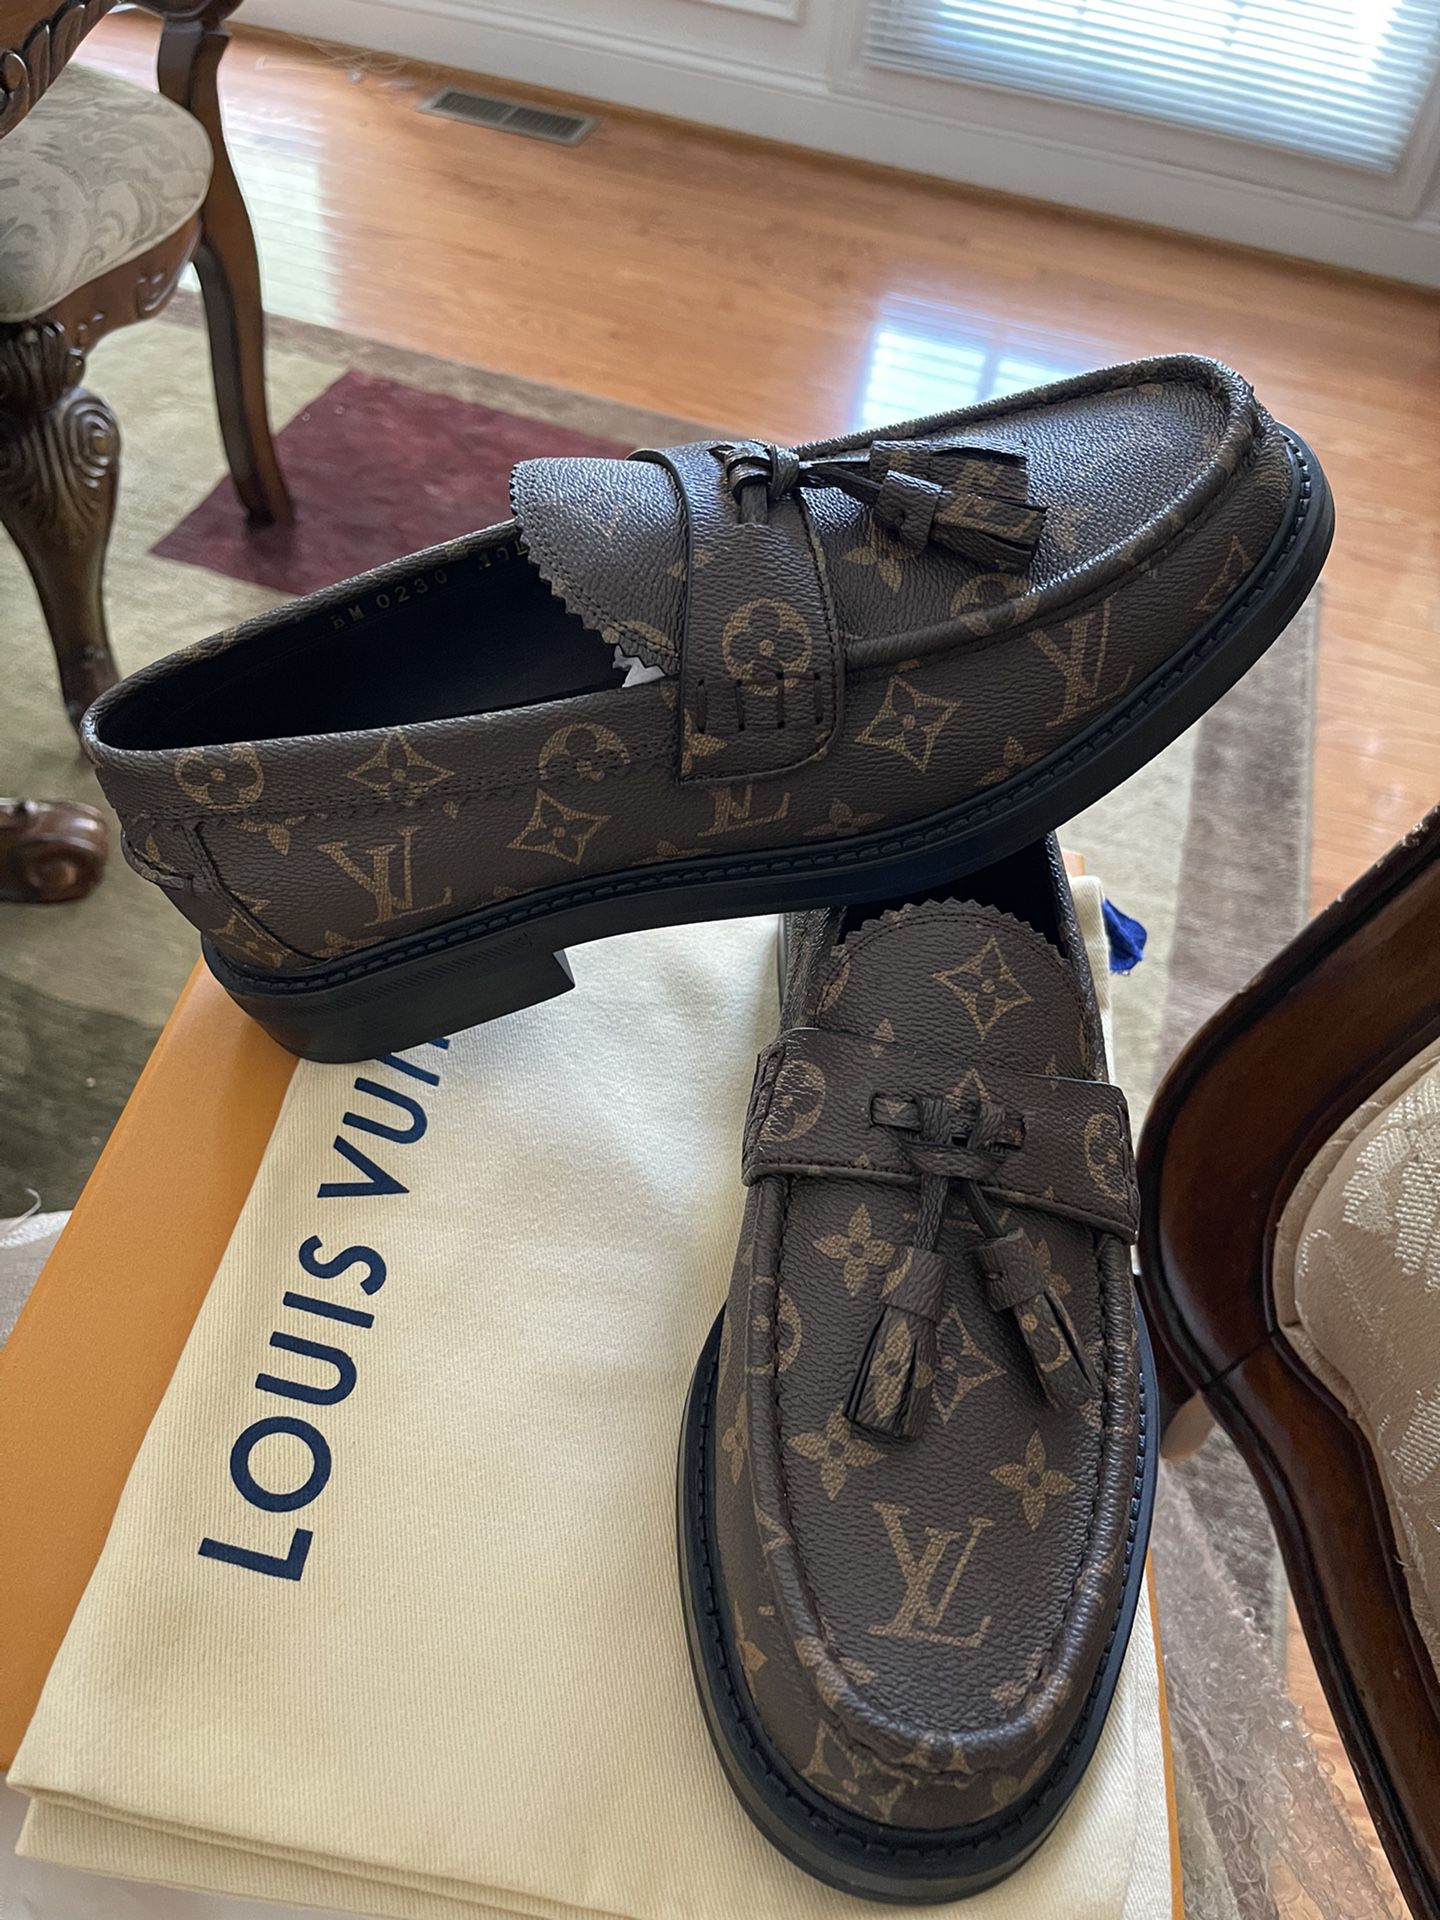 lv voltaire loafer